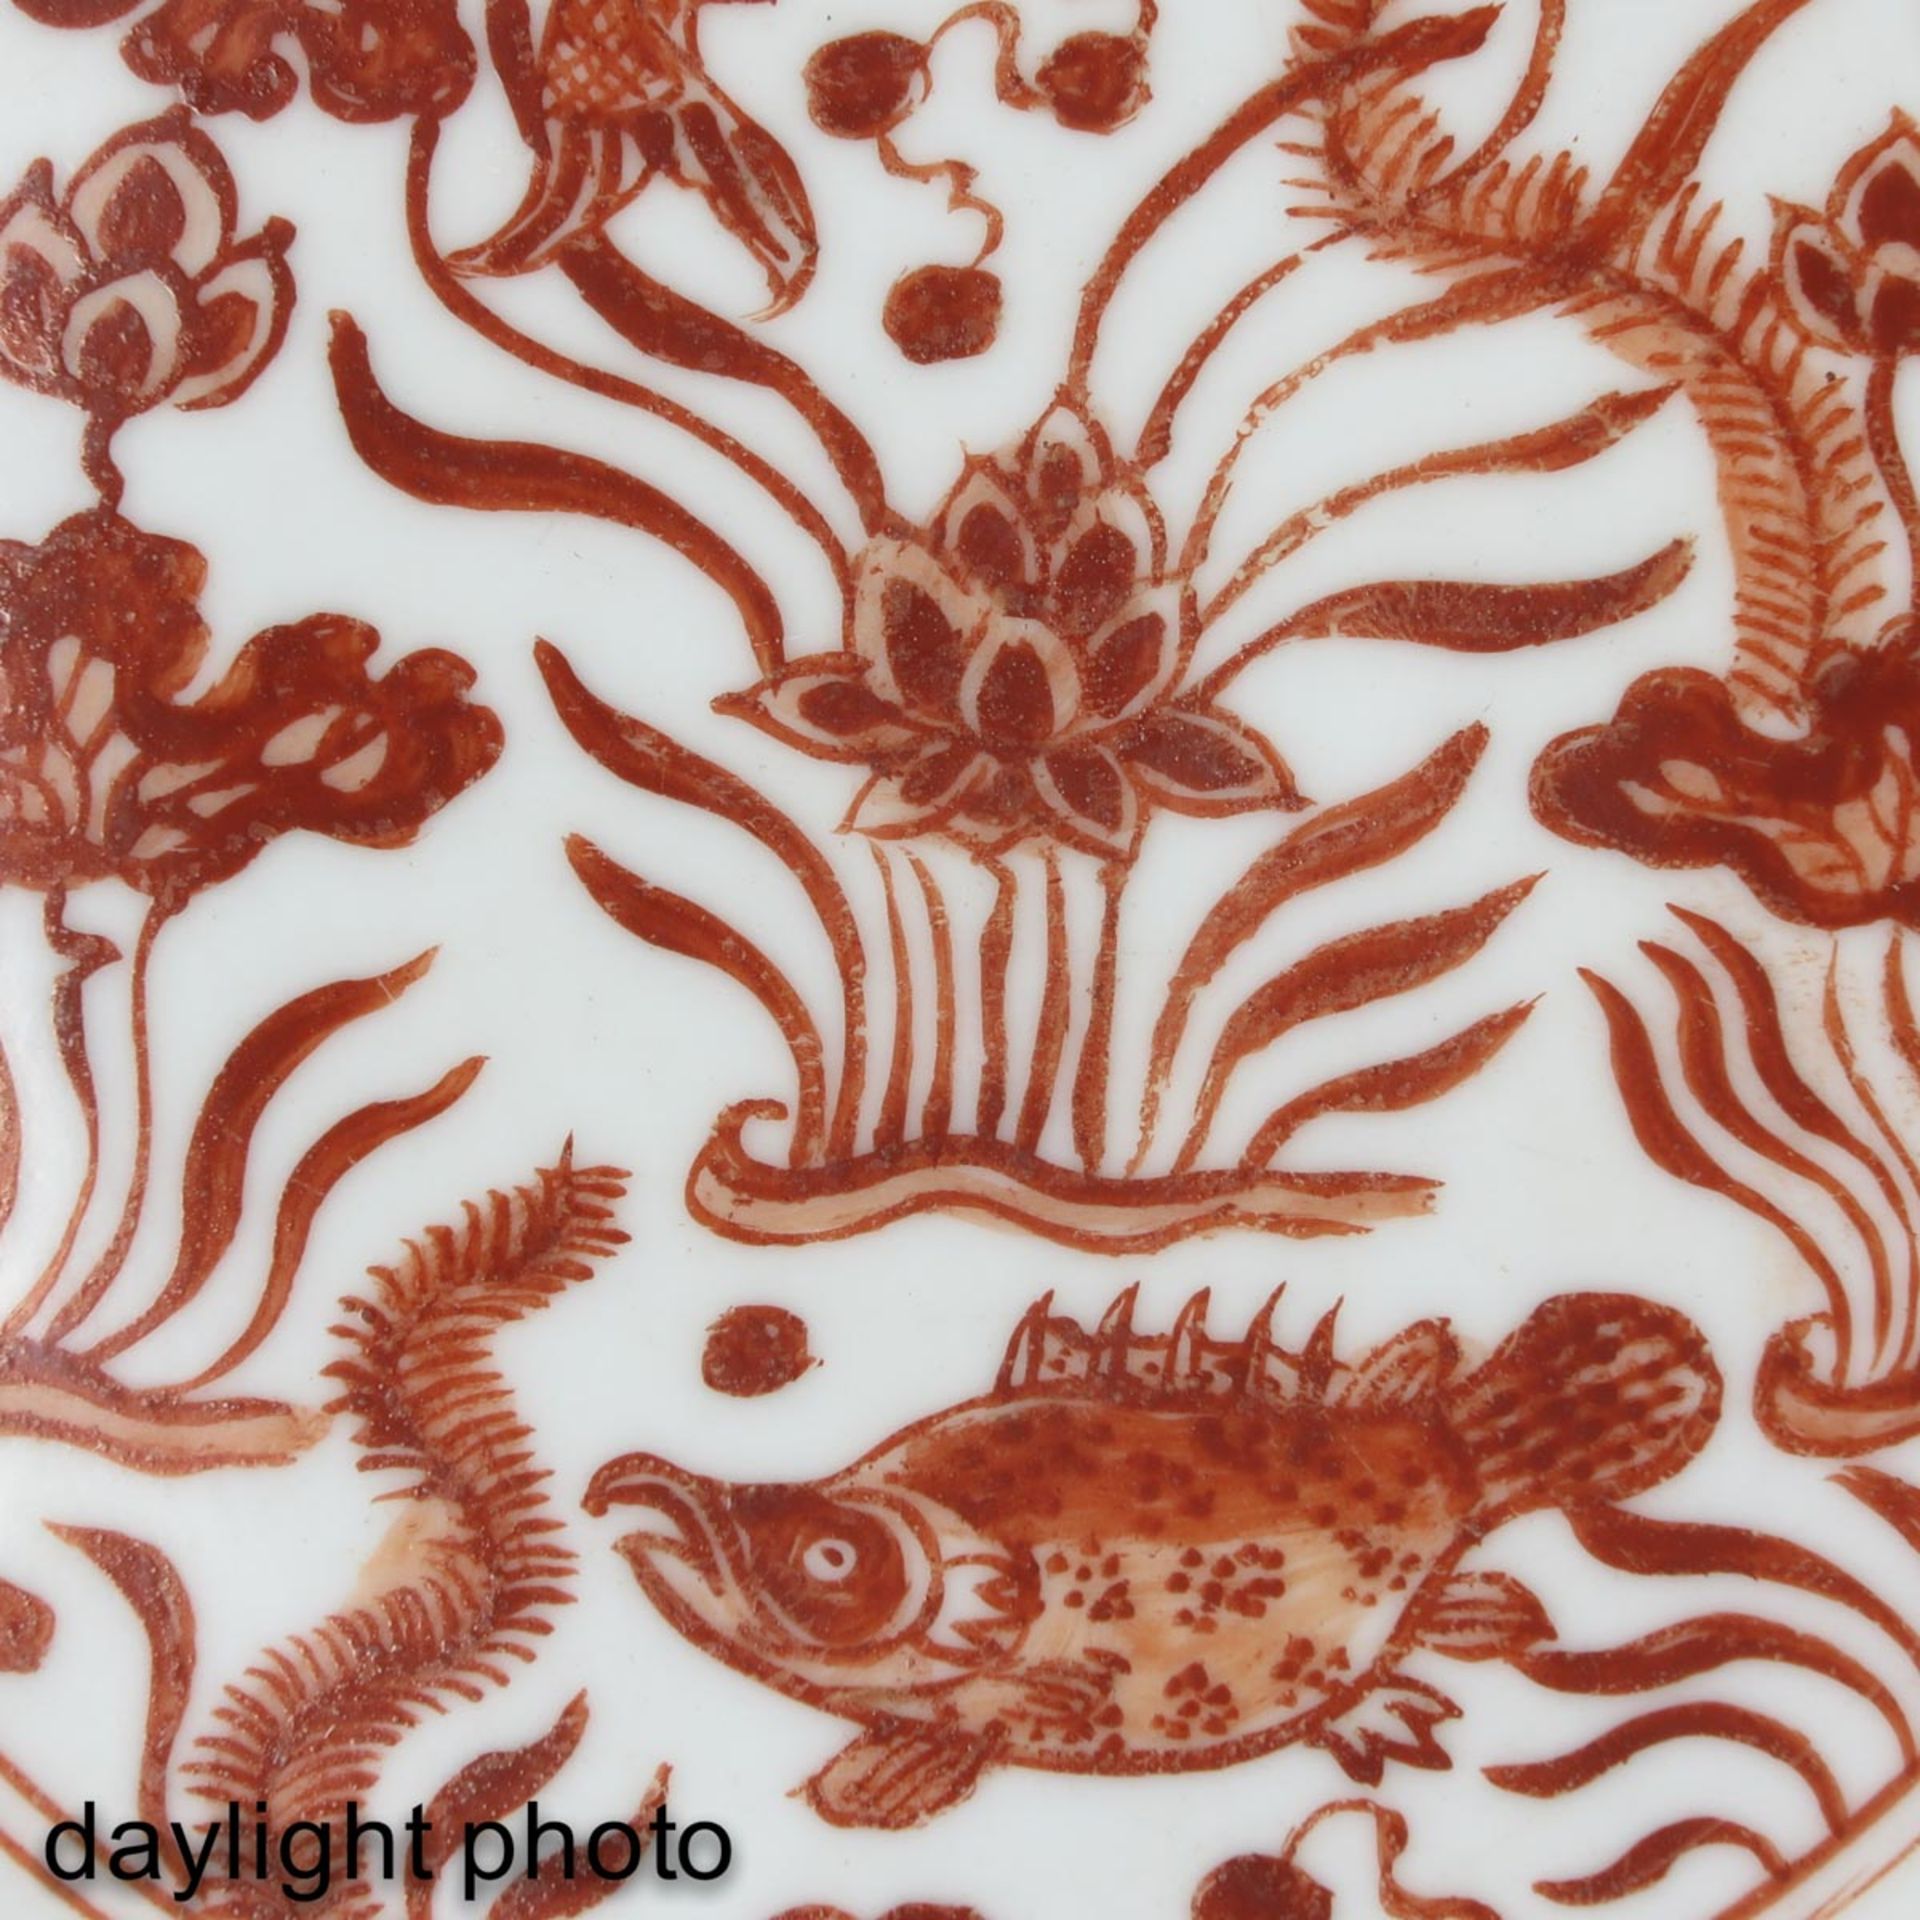 An Iron Red Decor Plate - Image 6 of 6